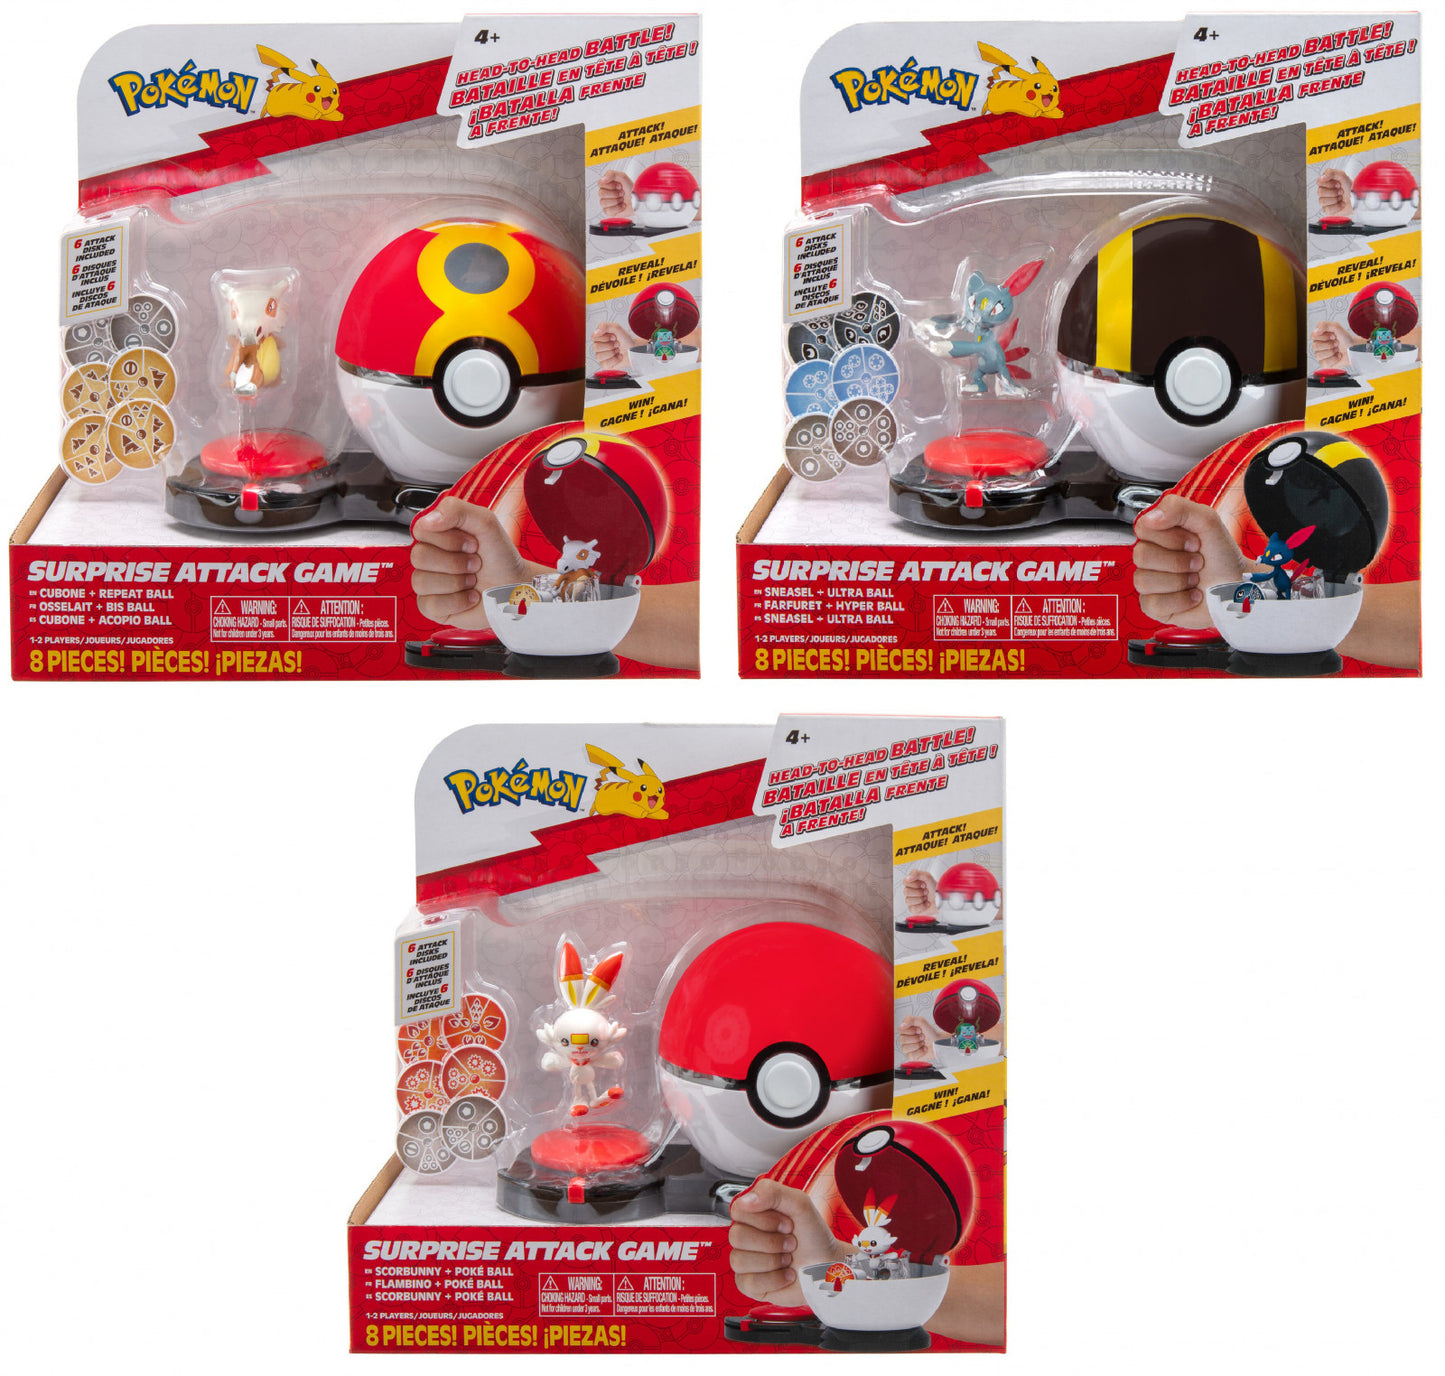 Pokemon Surprise Attack Game Assortment (4 in the Assortment)